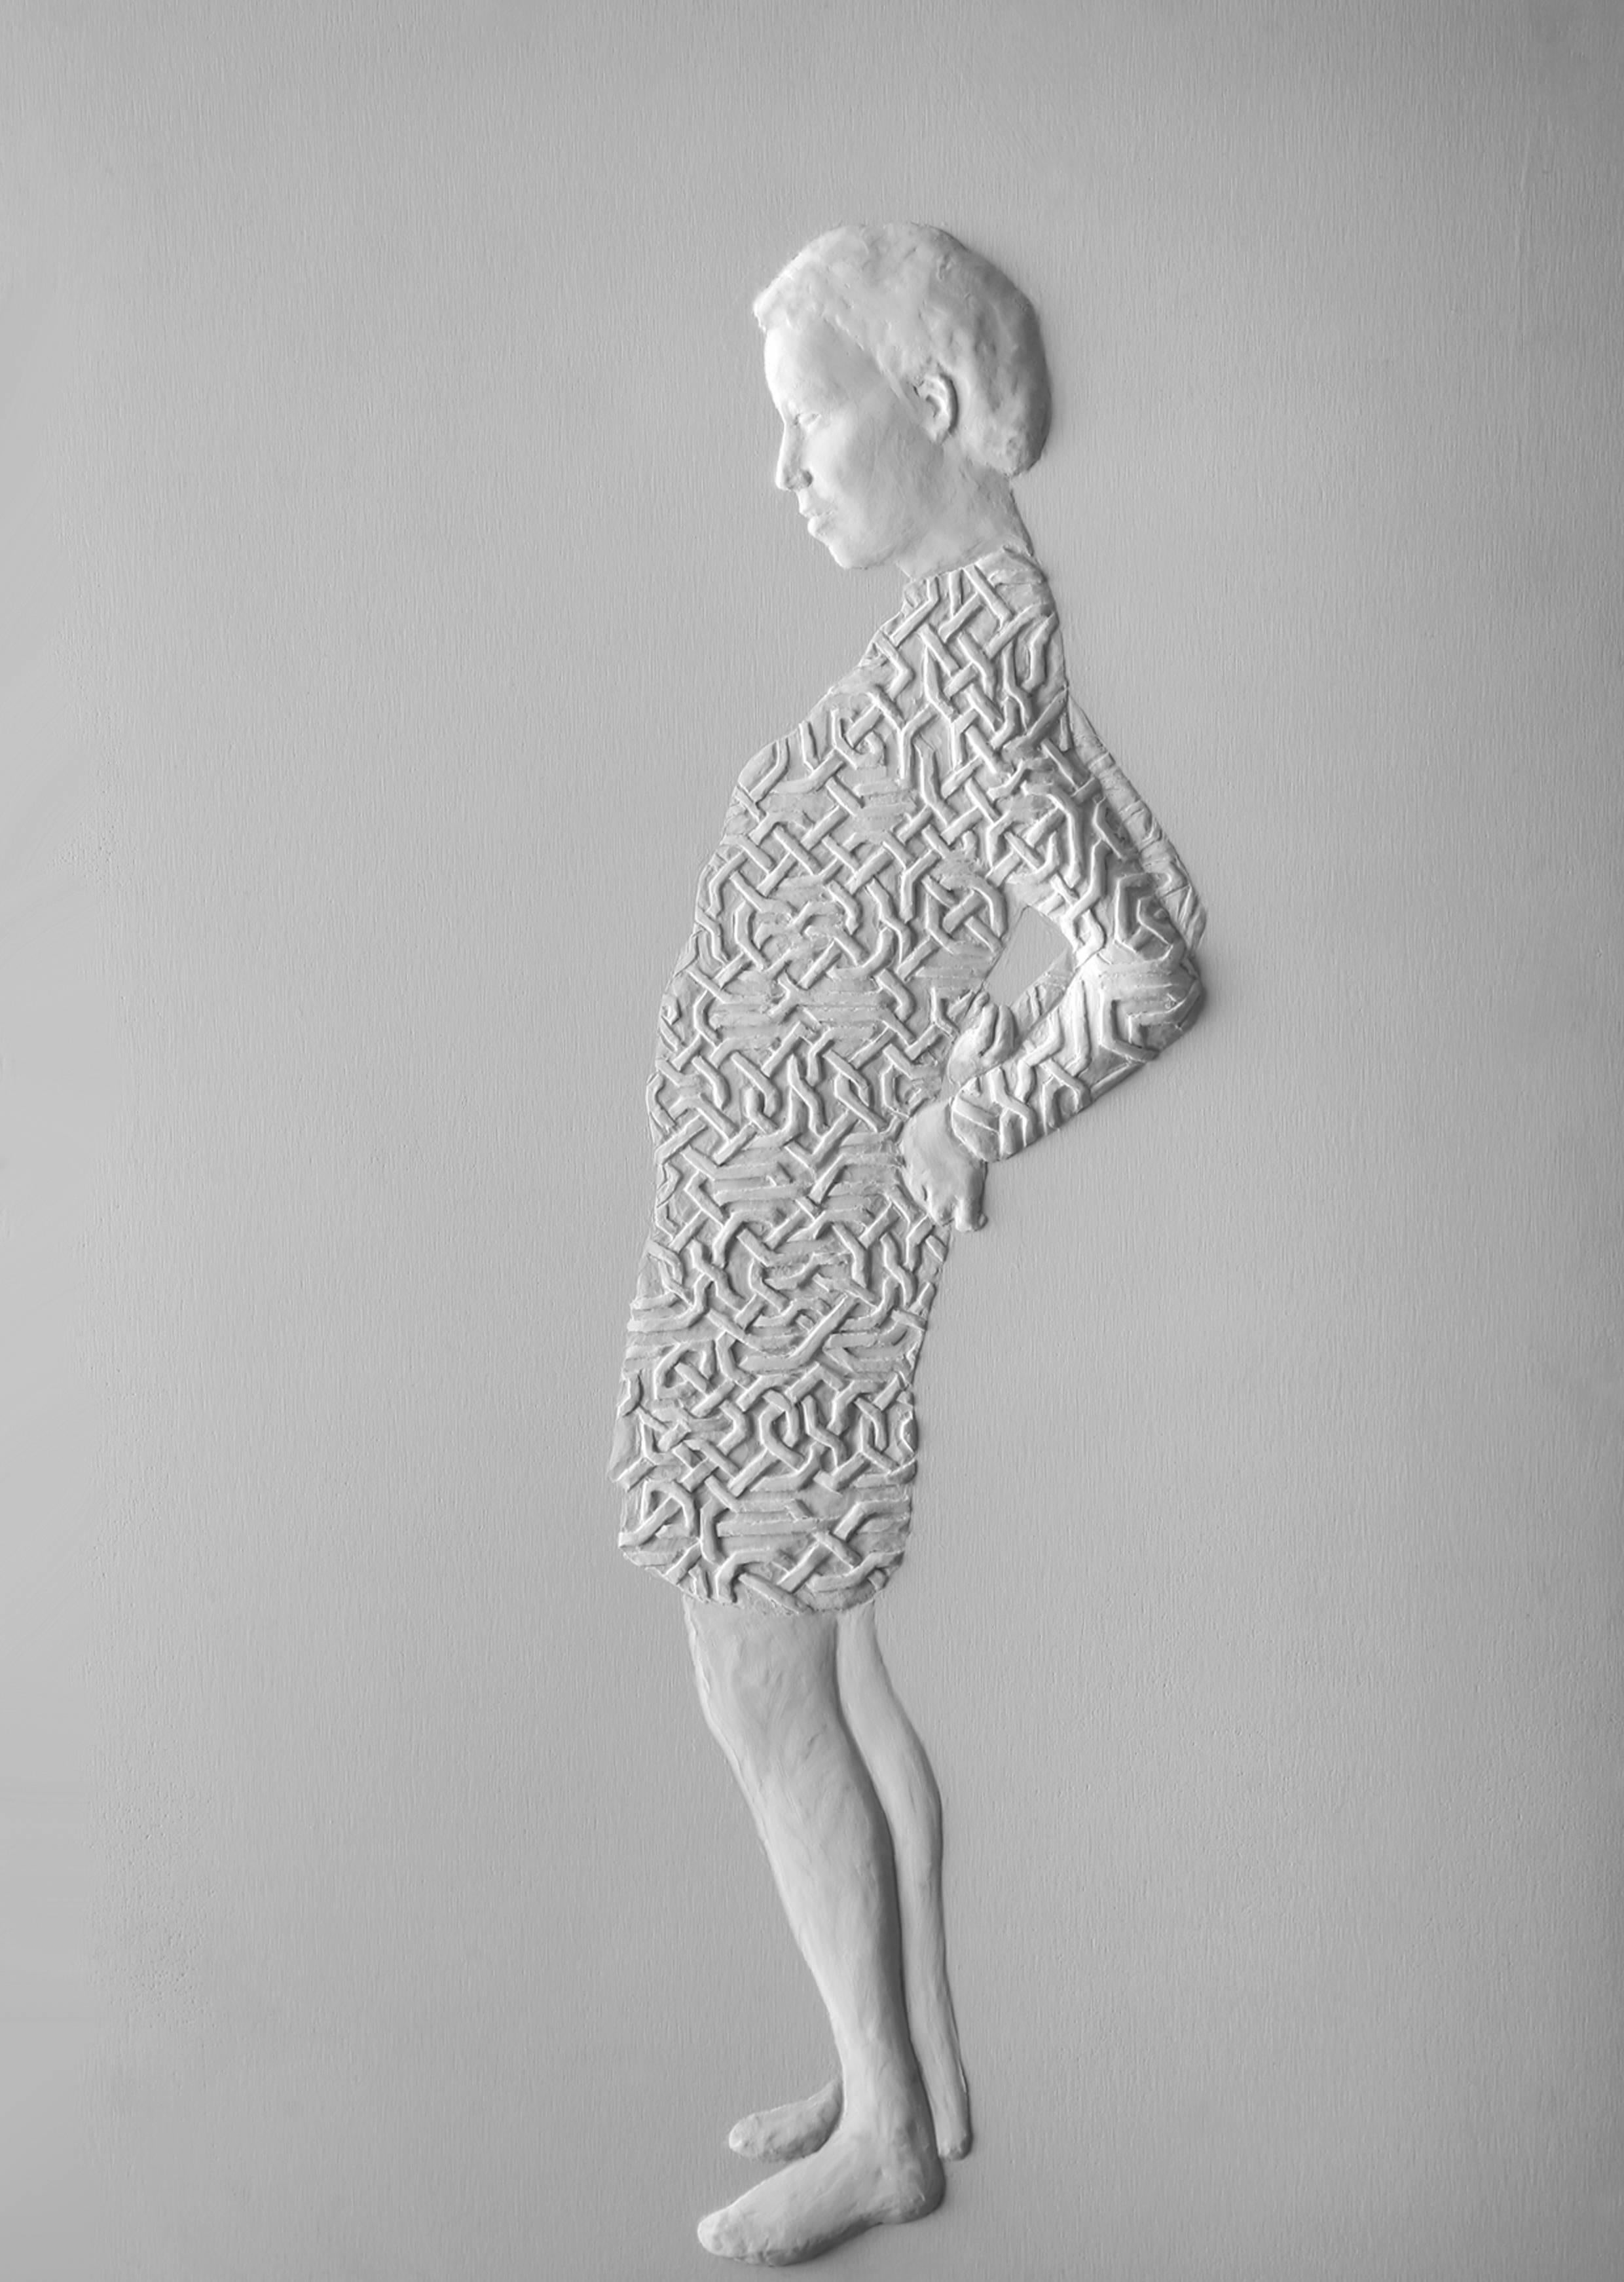 Maja Thommen Figurative Sculpture - "Infinity" Bas Relief Panel from the "Dressing" Series, 2011